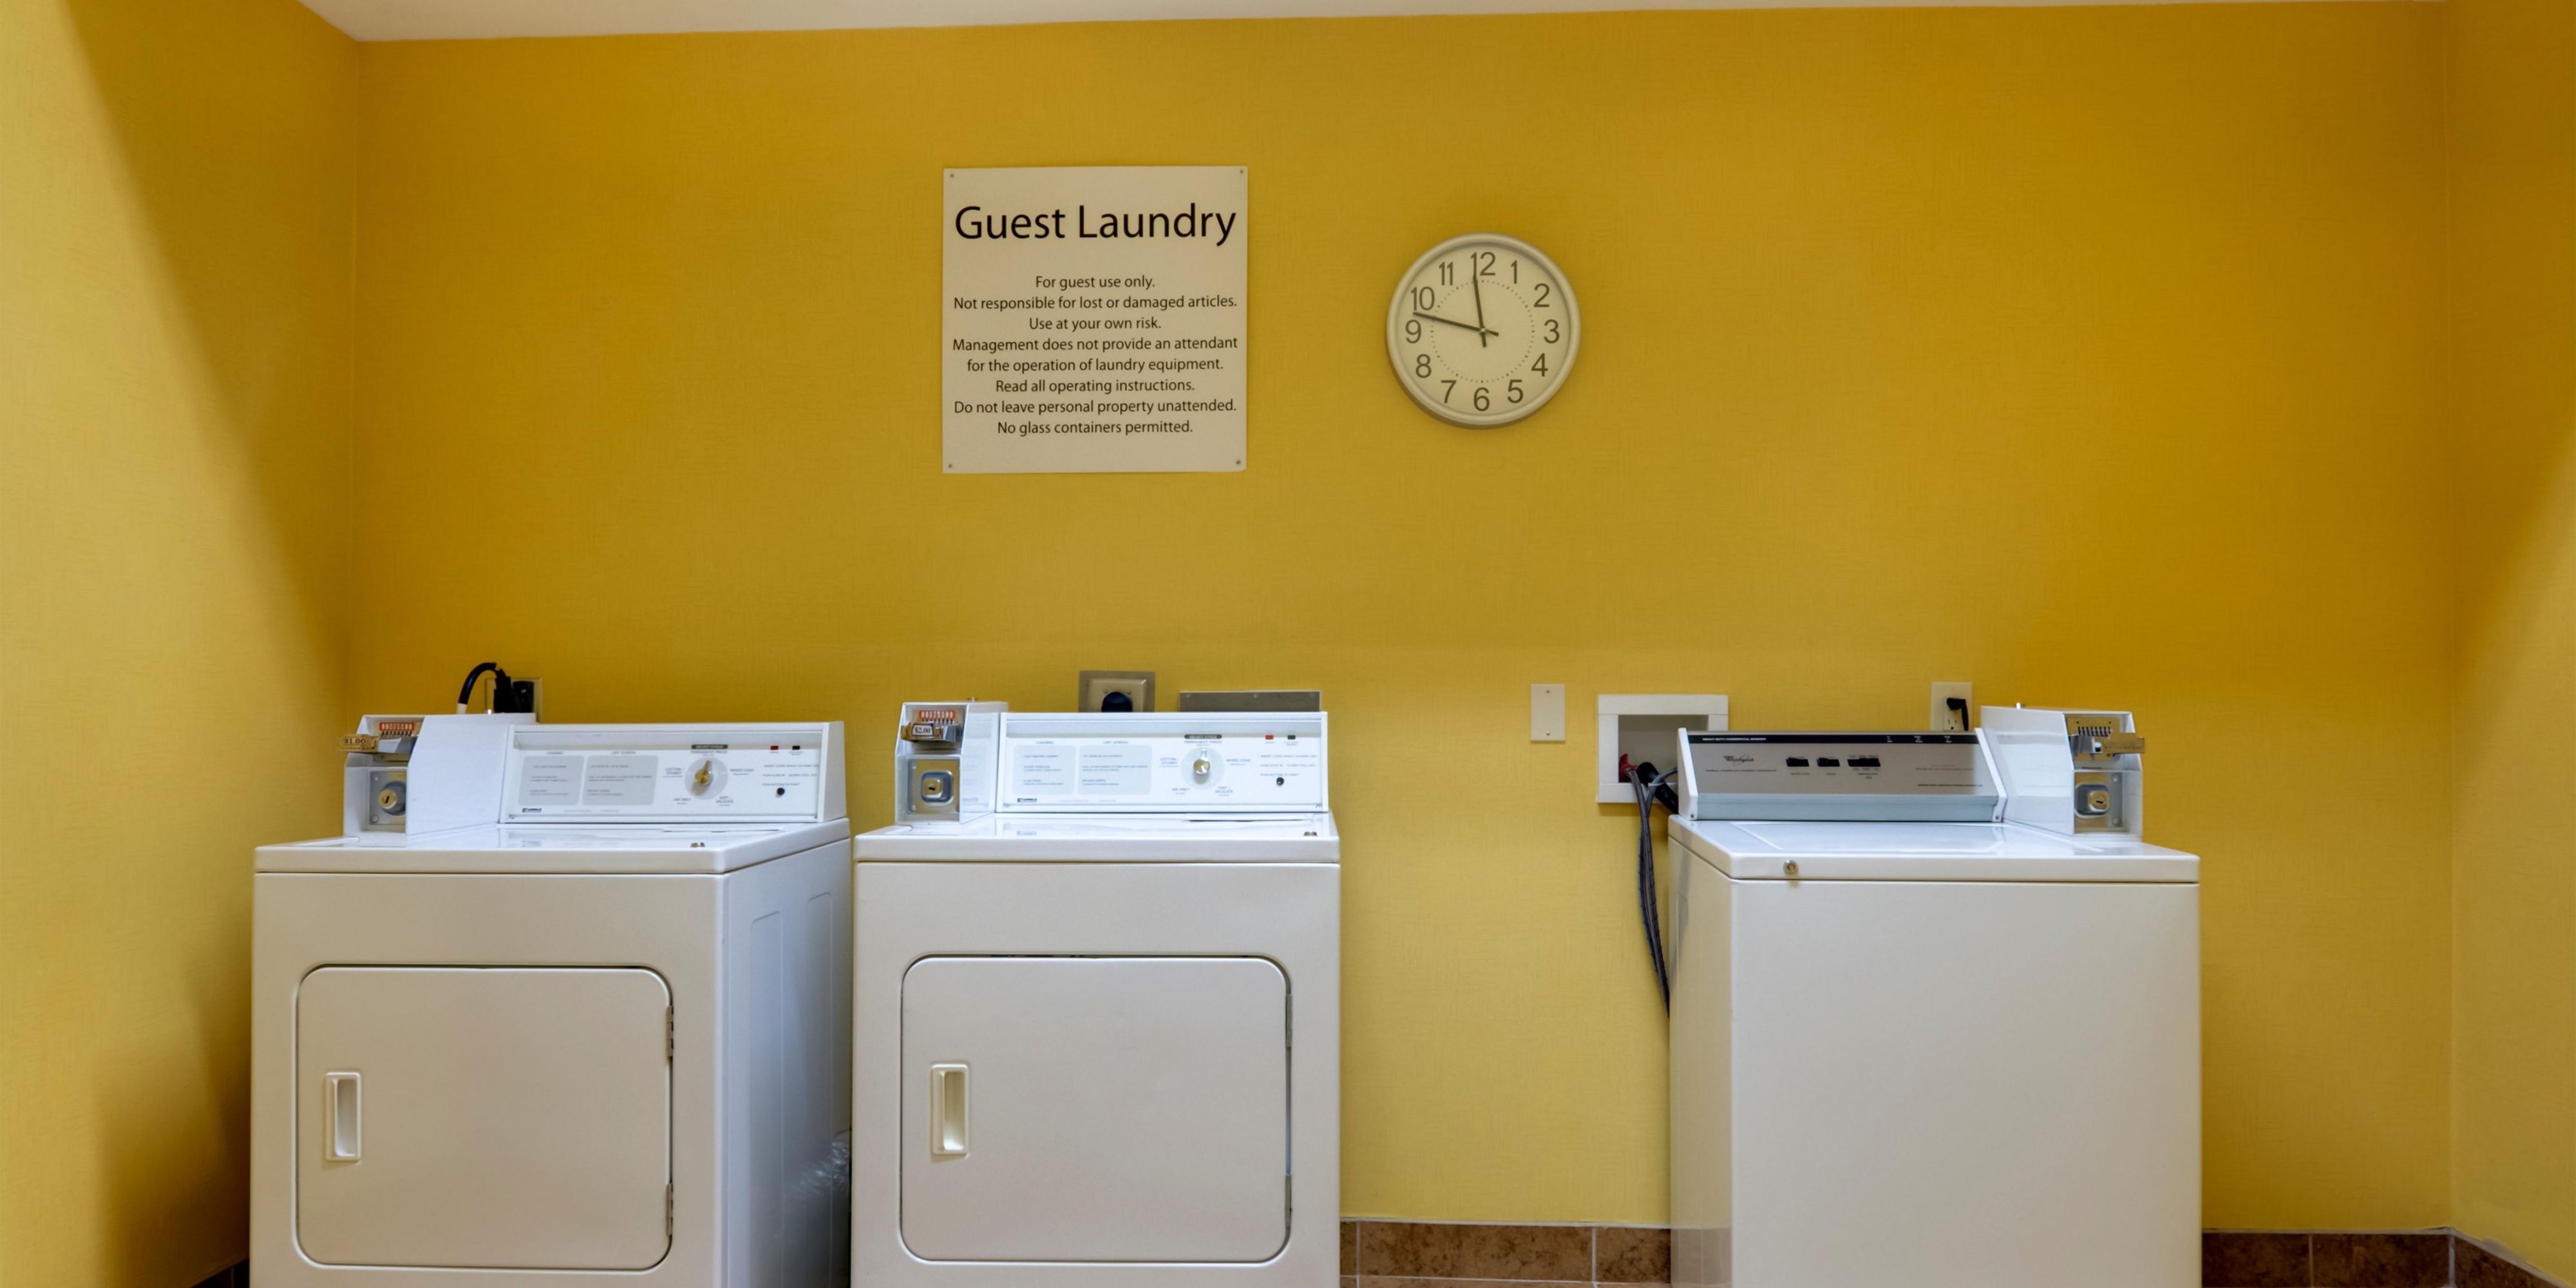 On-site Guest Self-Laundry Facilities
Hours of Operation: 6:00 AM - 11:00 PM